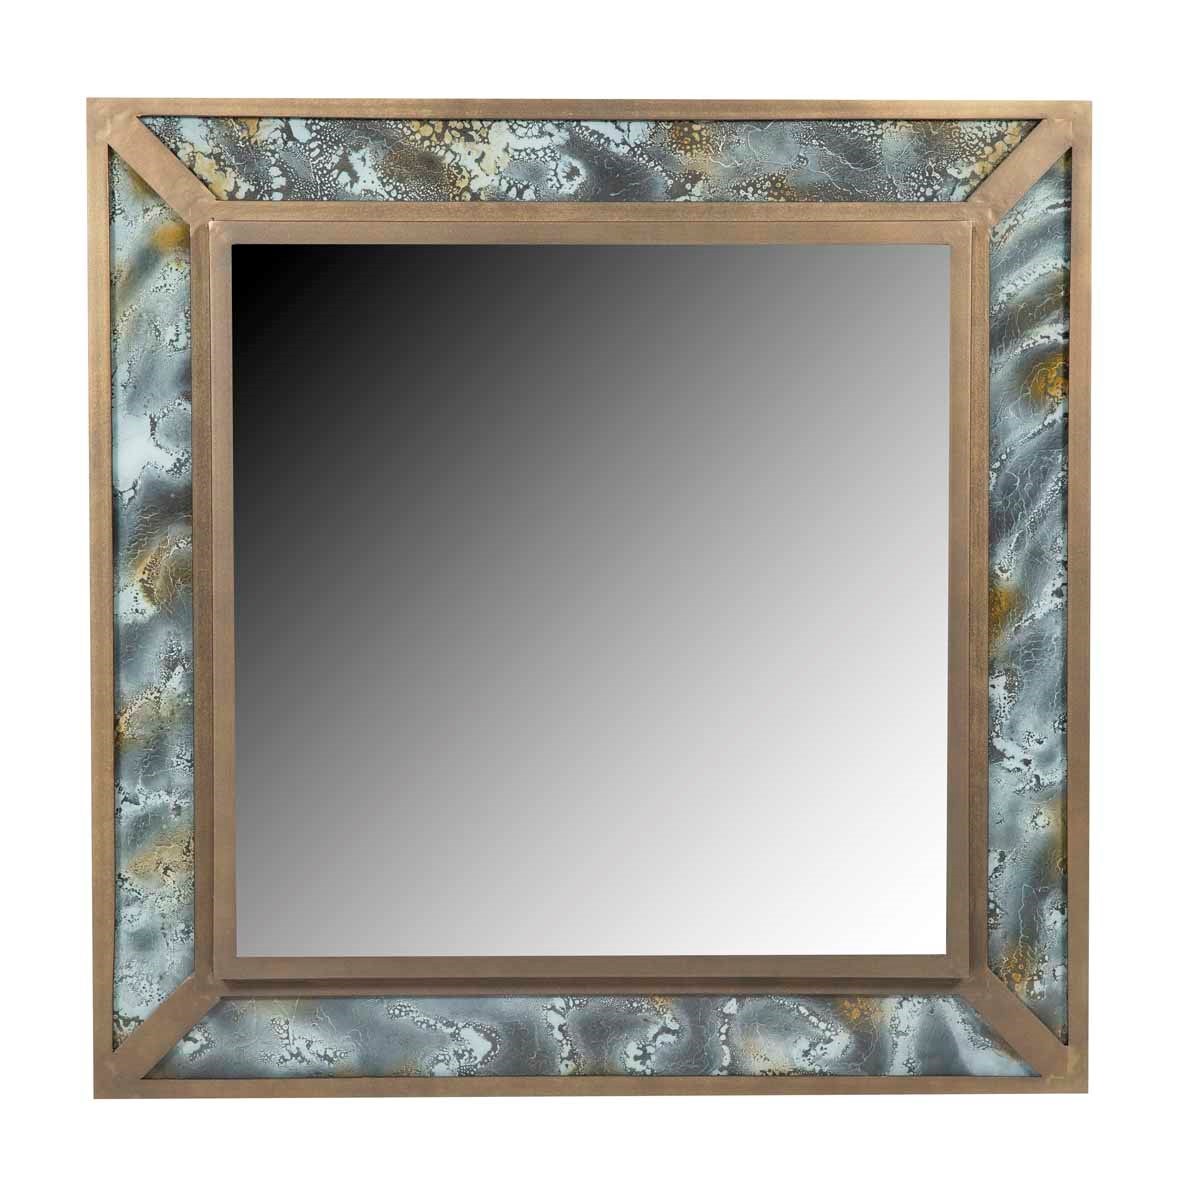 Griffin Square Mirror in Antique Brass with Glass Inserts in Agate Finish